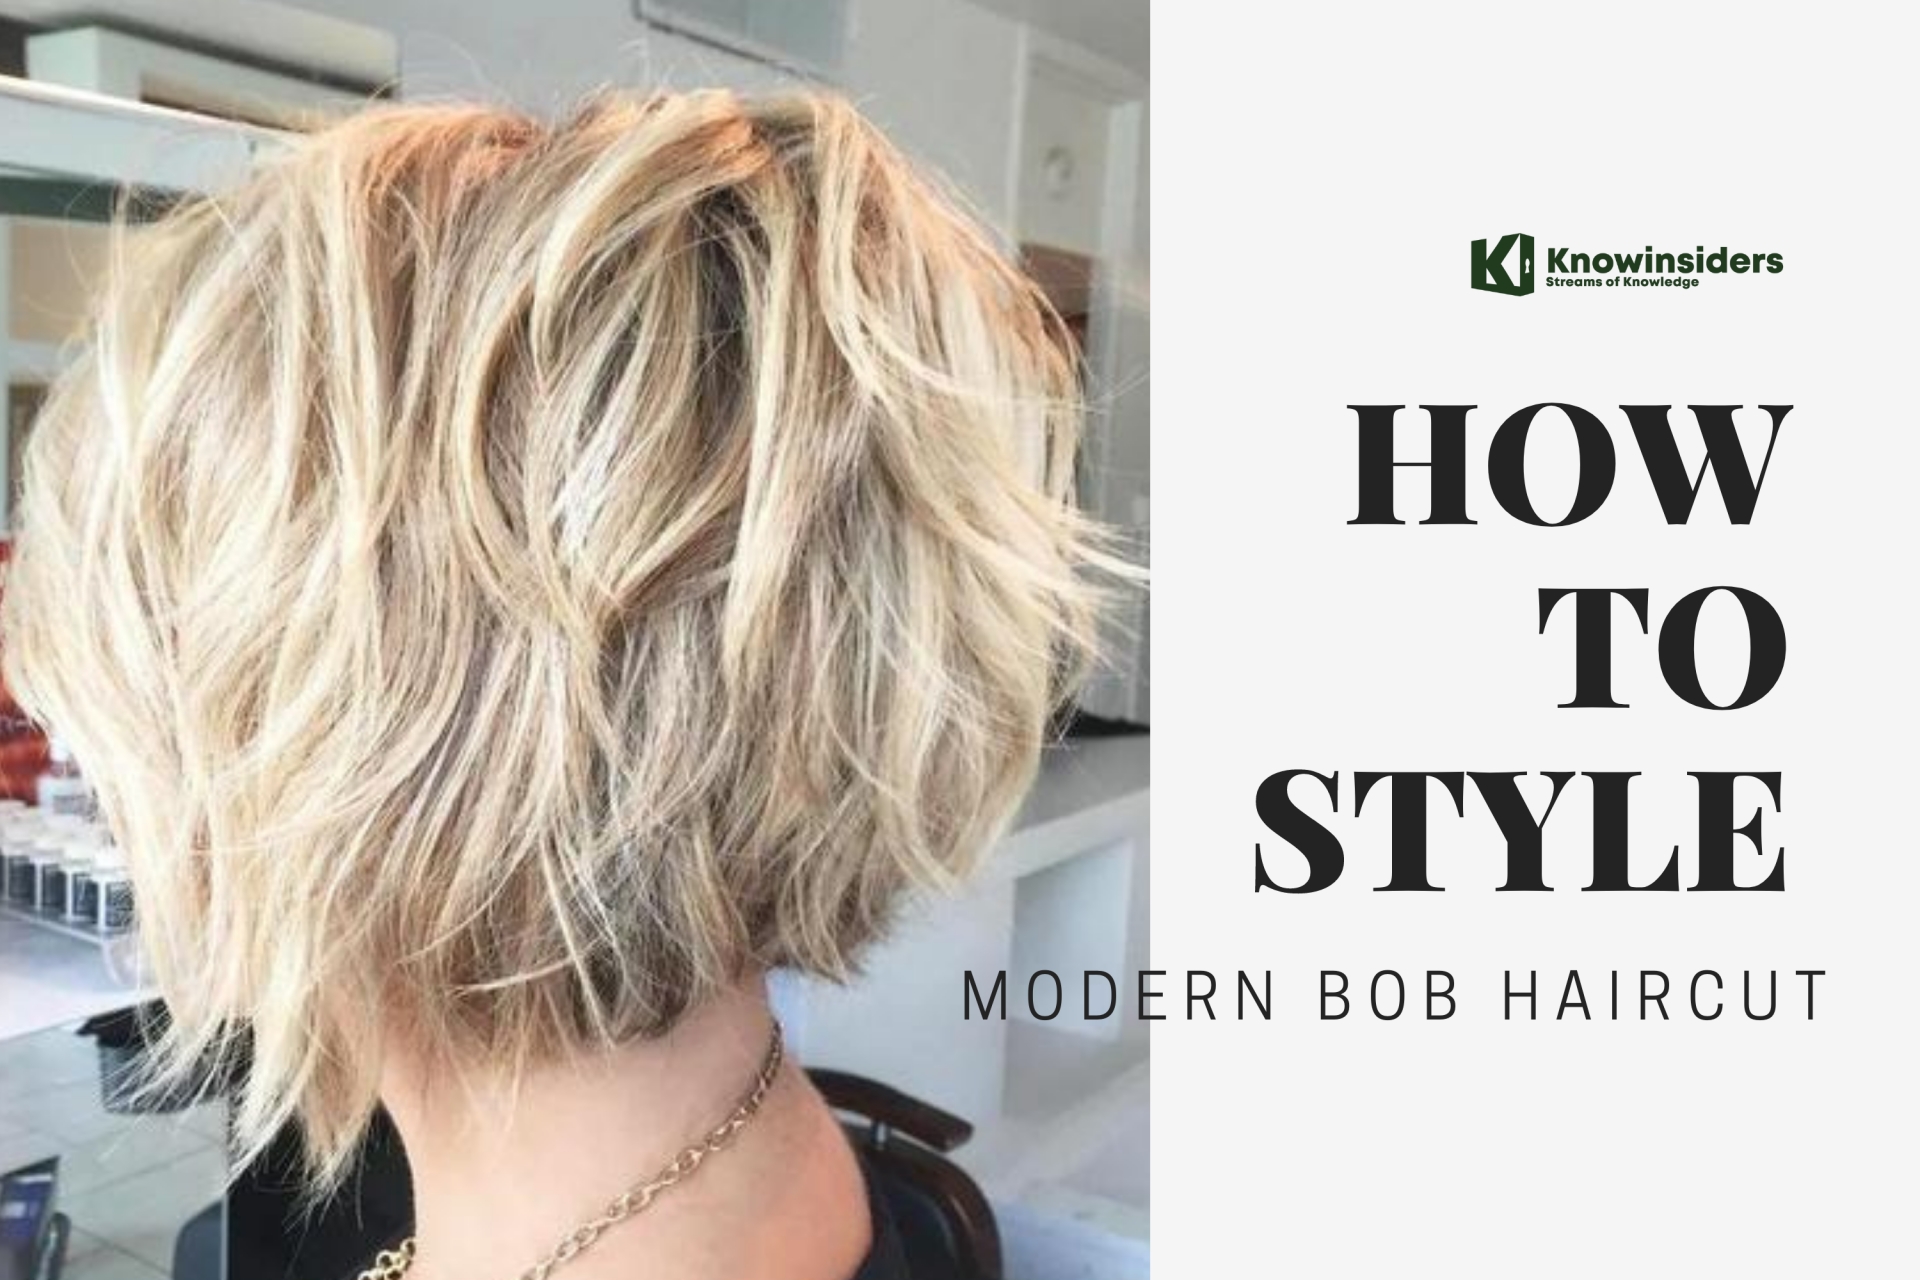 How To Style & Take Care Of Bob Haircut 2022